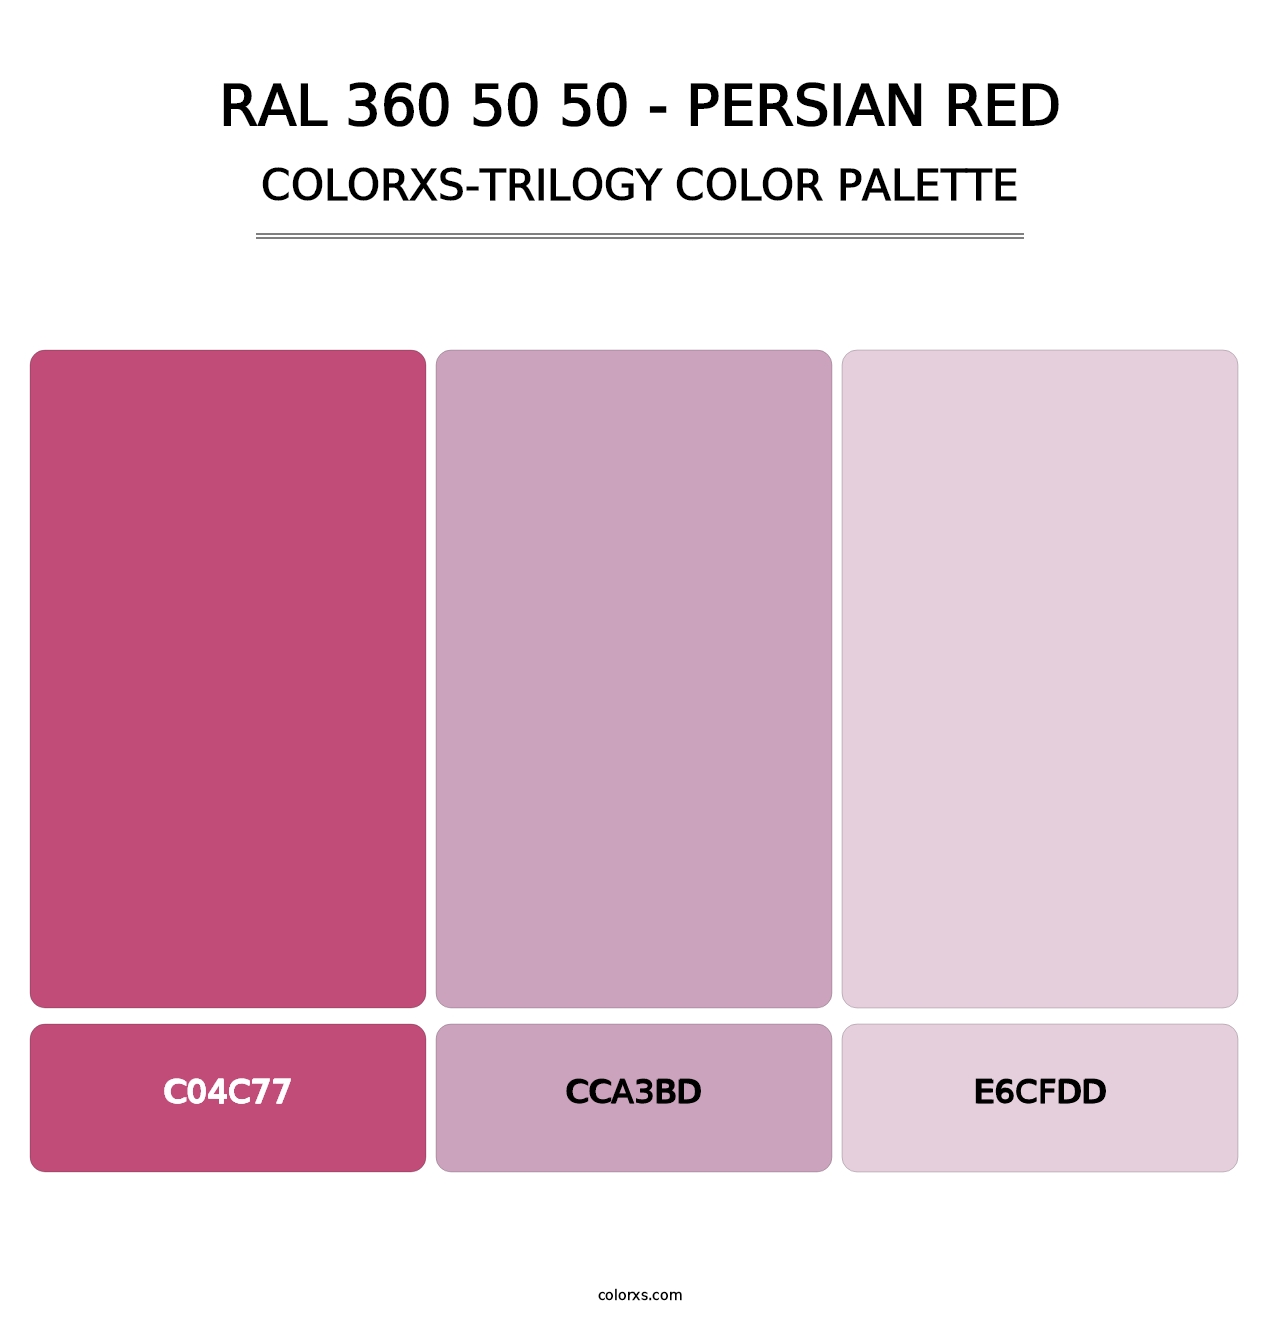 RAL 360 50 50 - Persian Red - Colorxs Trilogy Palette